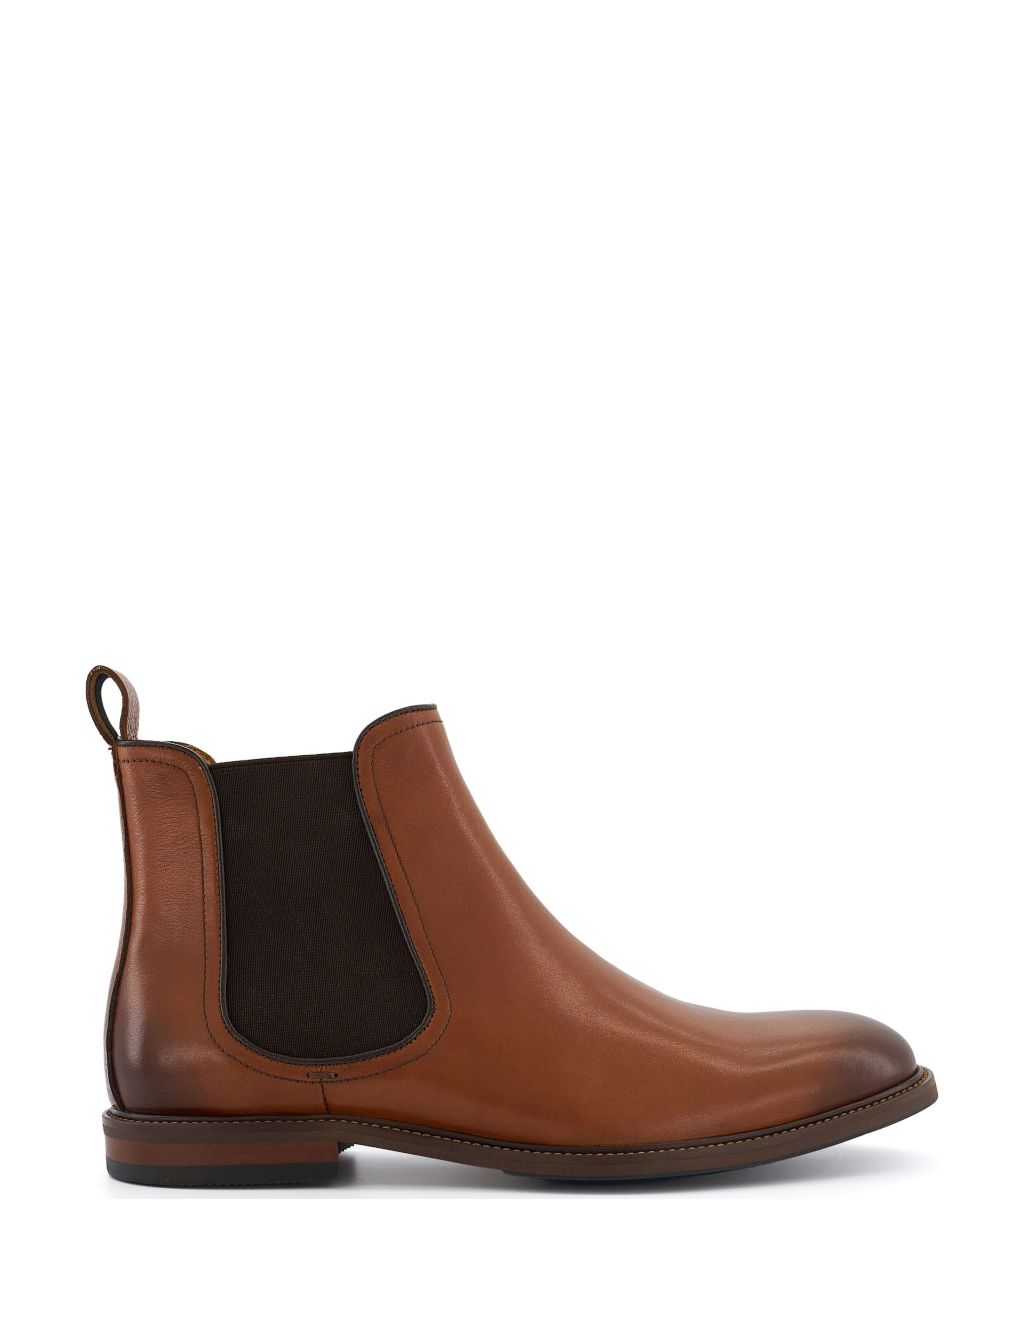 Leather Chelsea Boots image 1